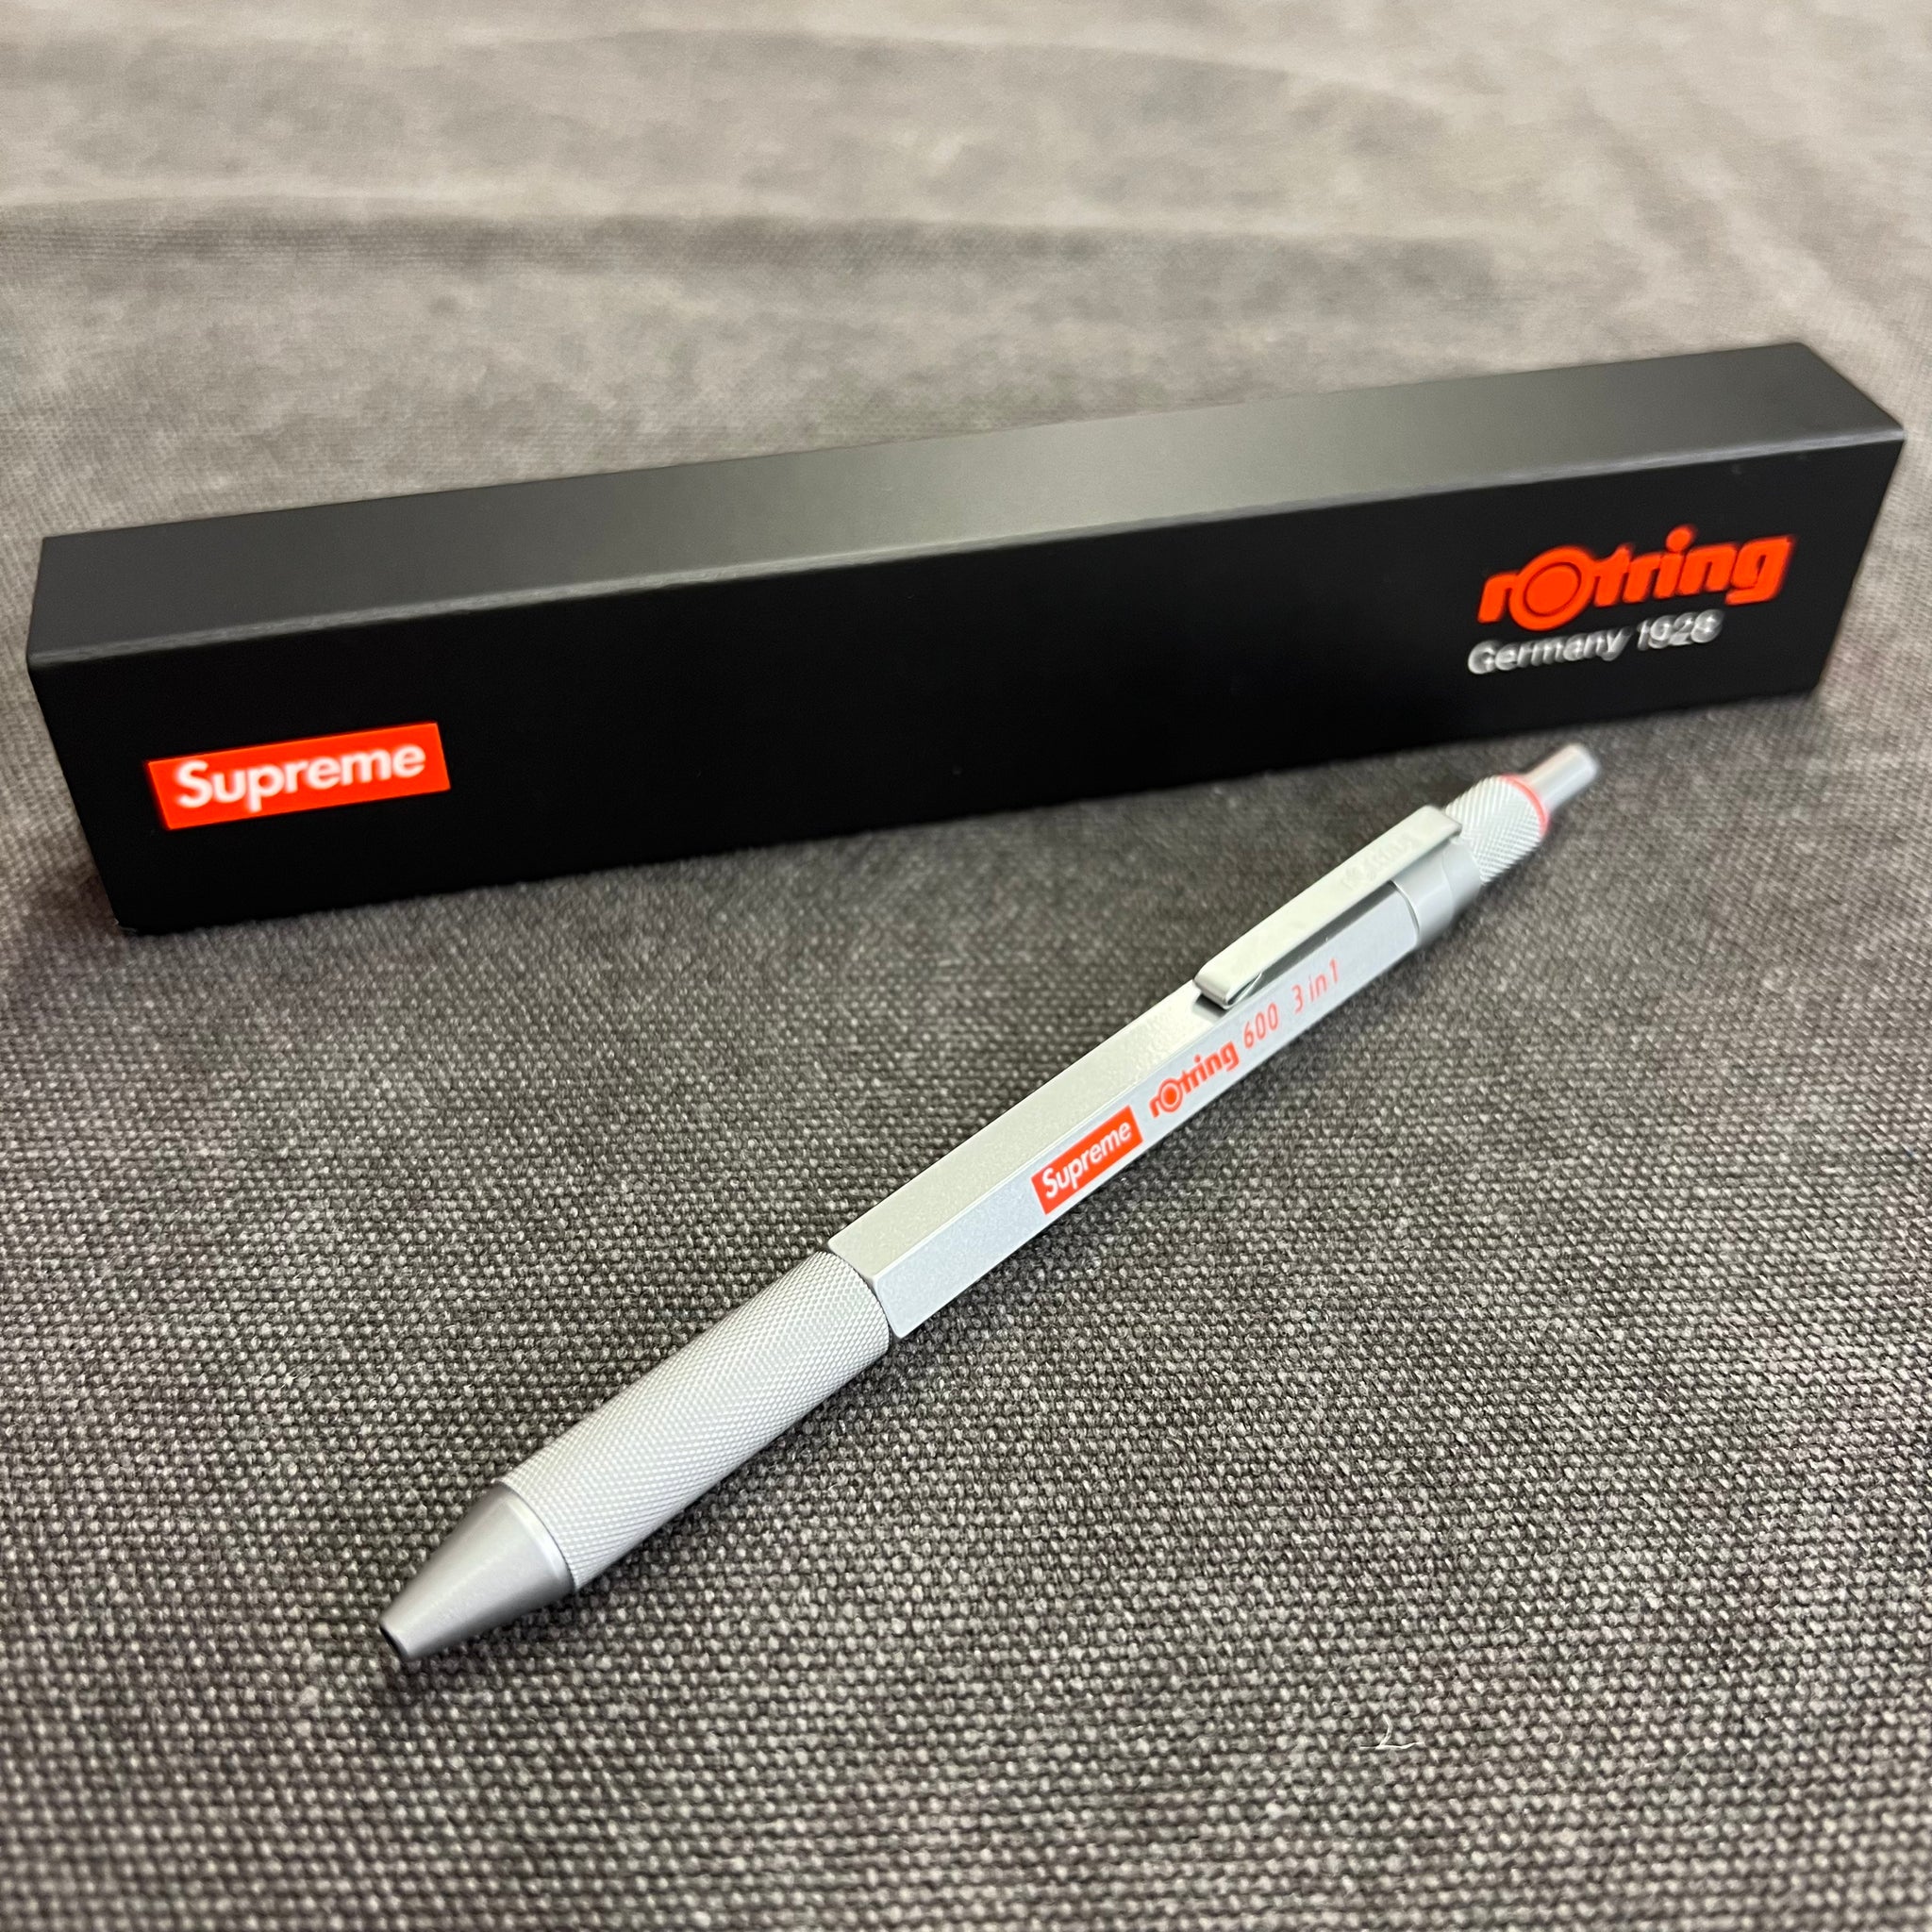 SUPREME ROTING 600 3 IN 1 PEN – Trade Point_HK